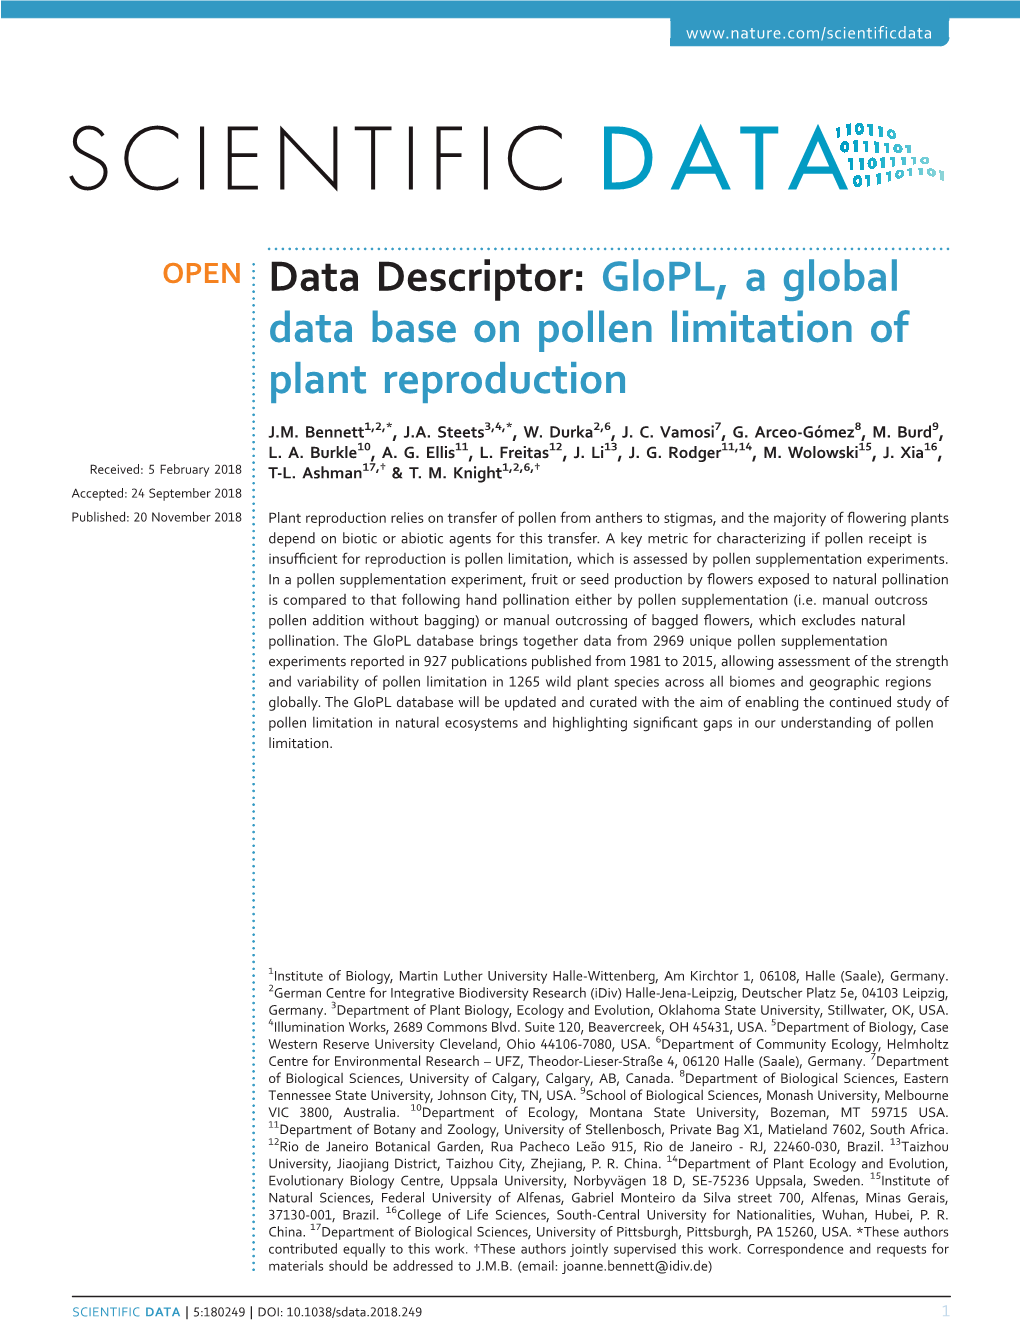 Glopl, a Global Data Base on Pollen Limitation of Plant Reproduction